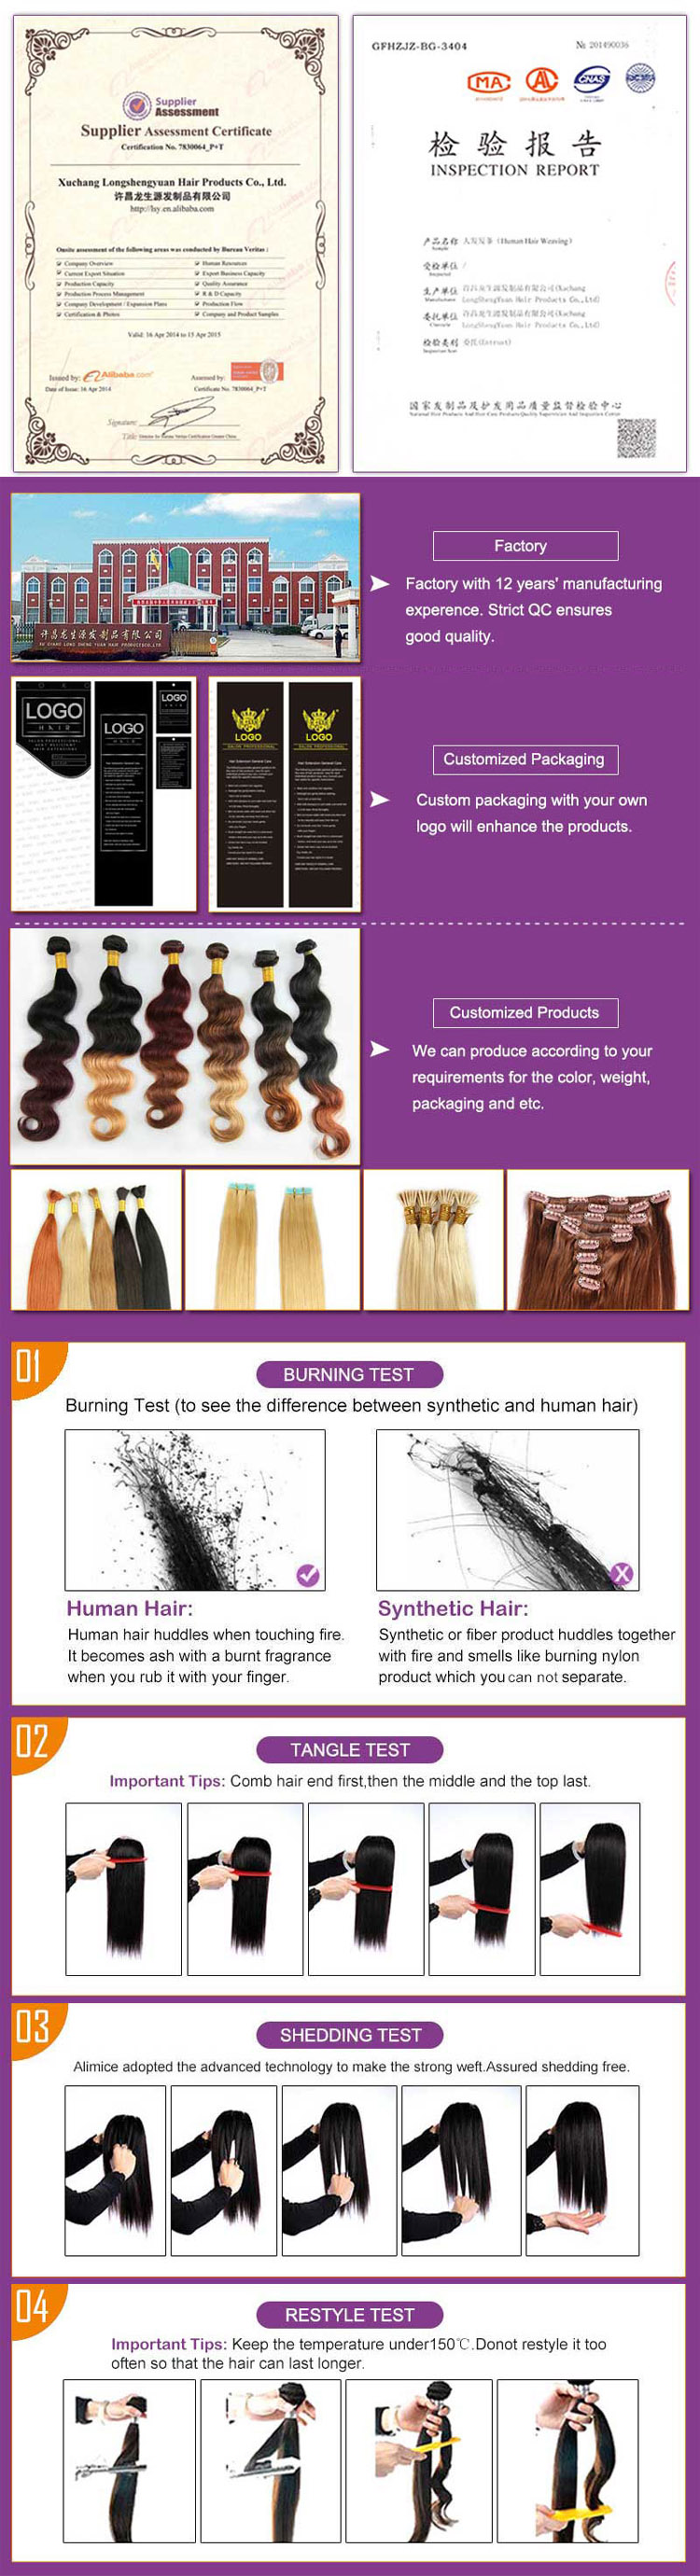 Factory Direct Price New Fashion Cheap Angels Kenya Hair Weaves